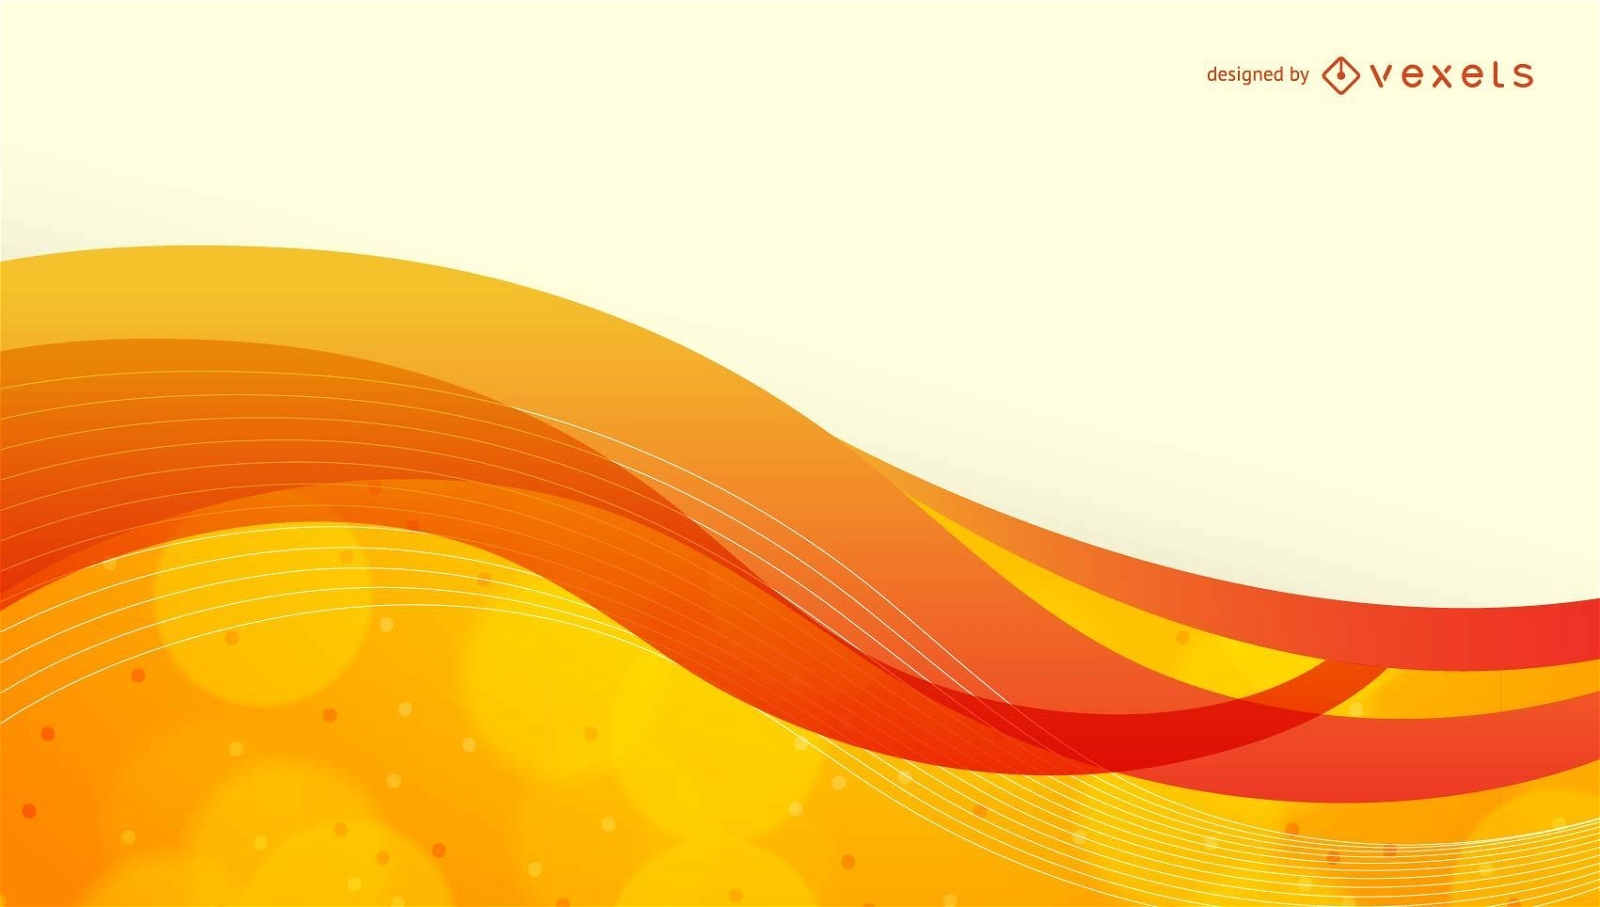 Waving Orange Curves & Bubbles Abstract Background